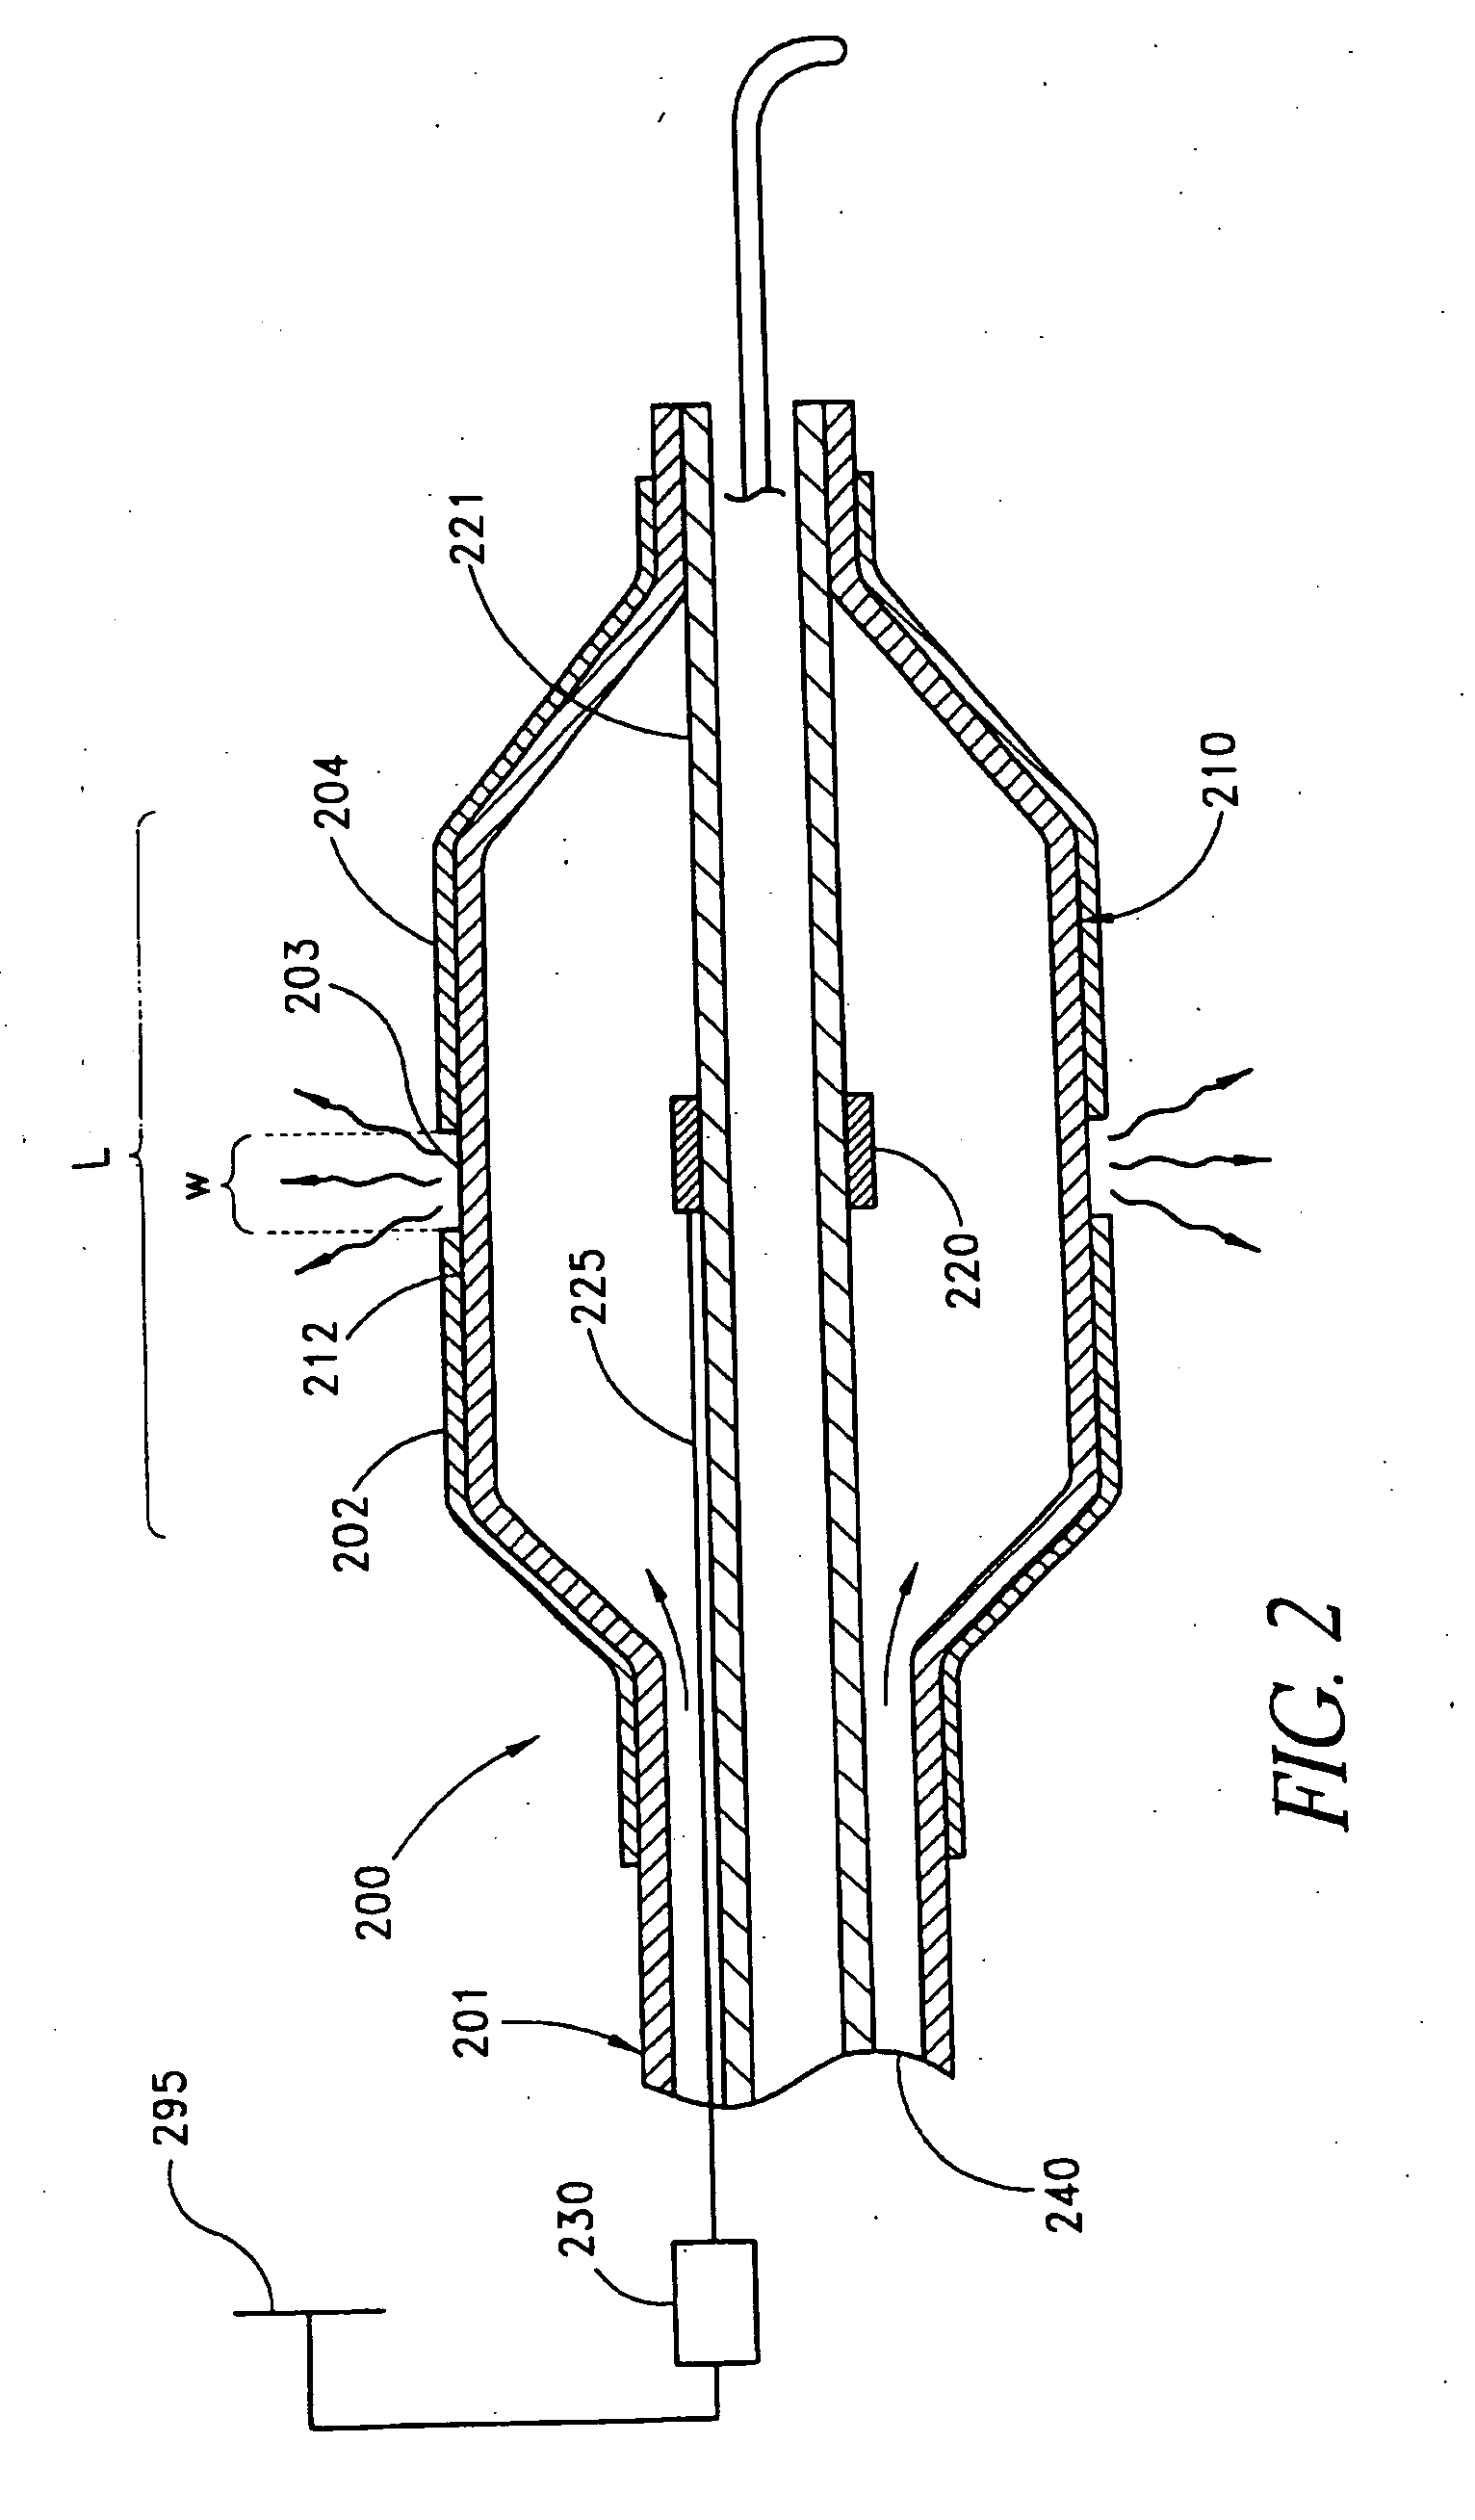 Circumferential ablation device assembly with an expandable member